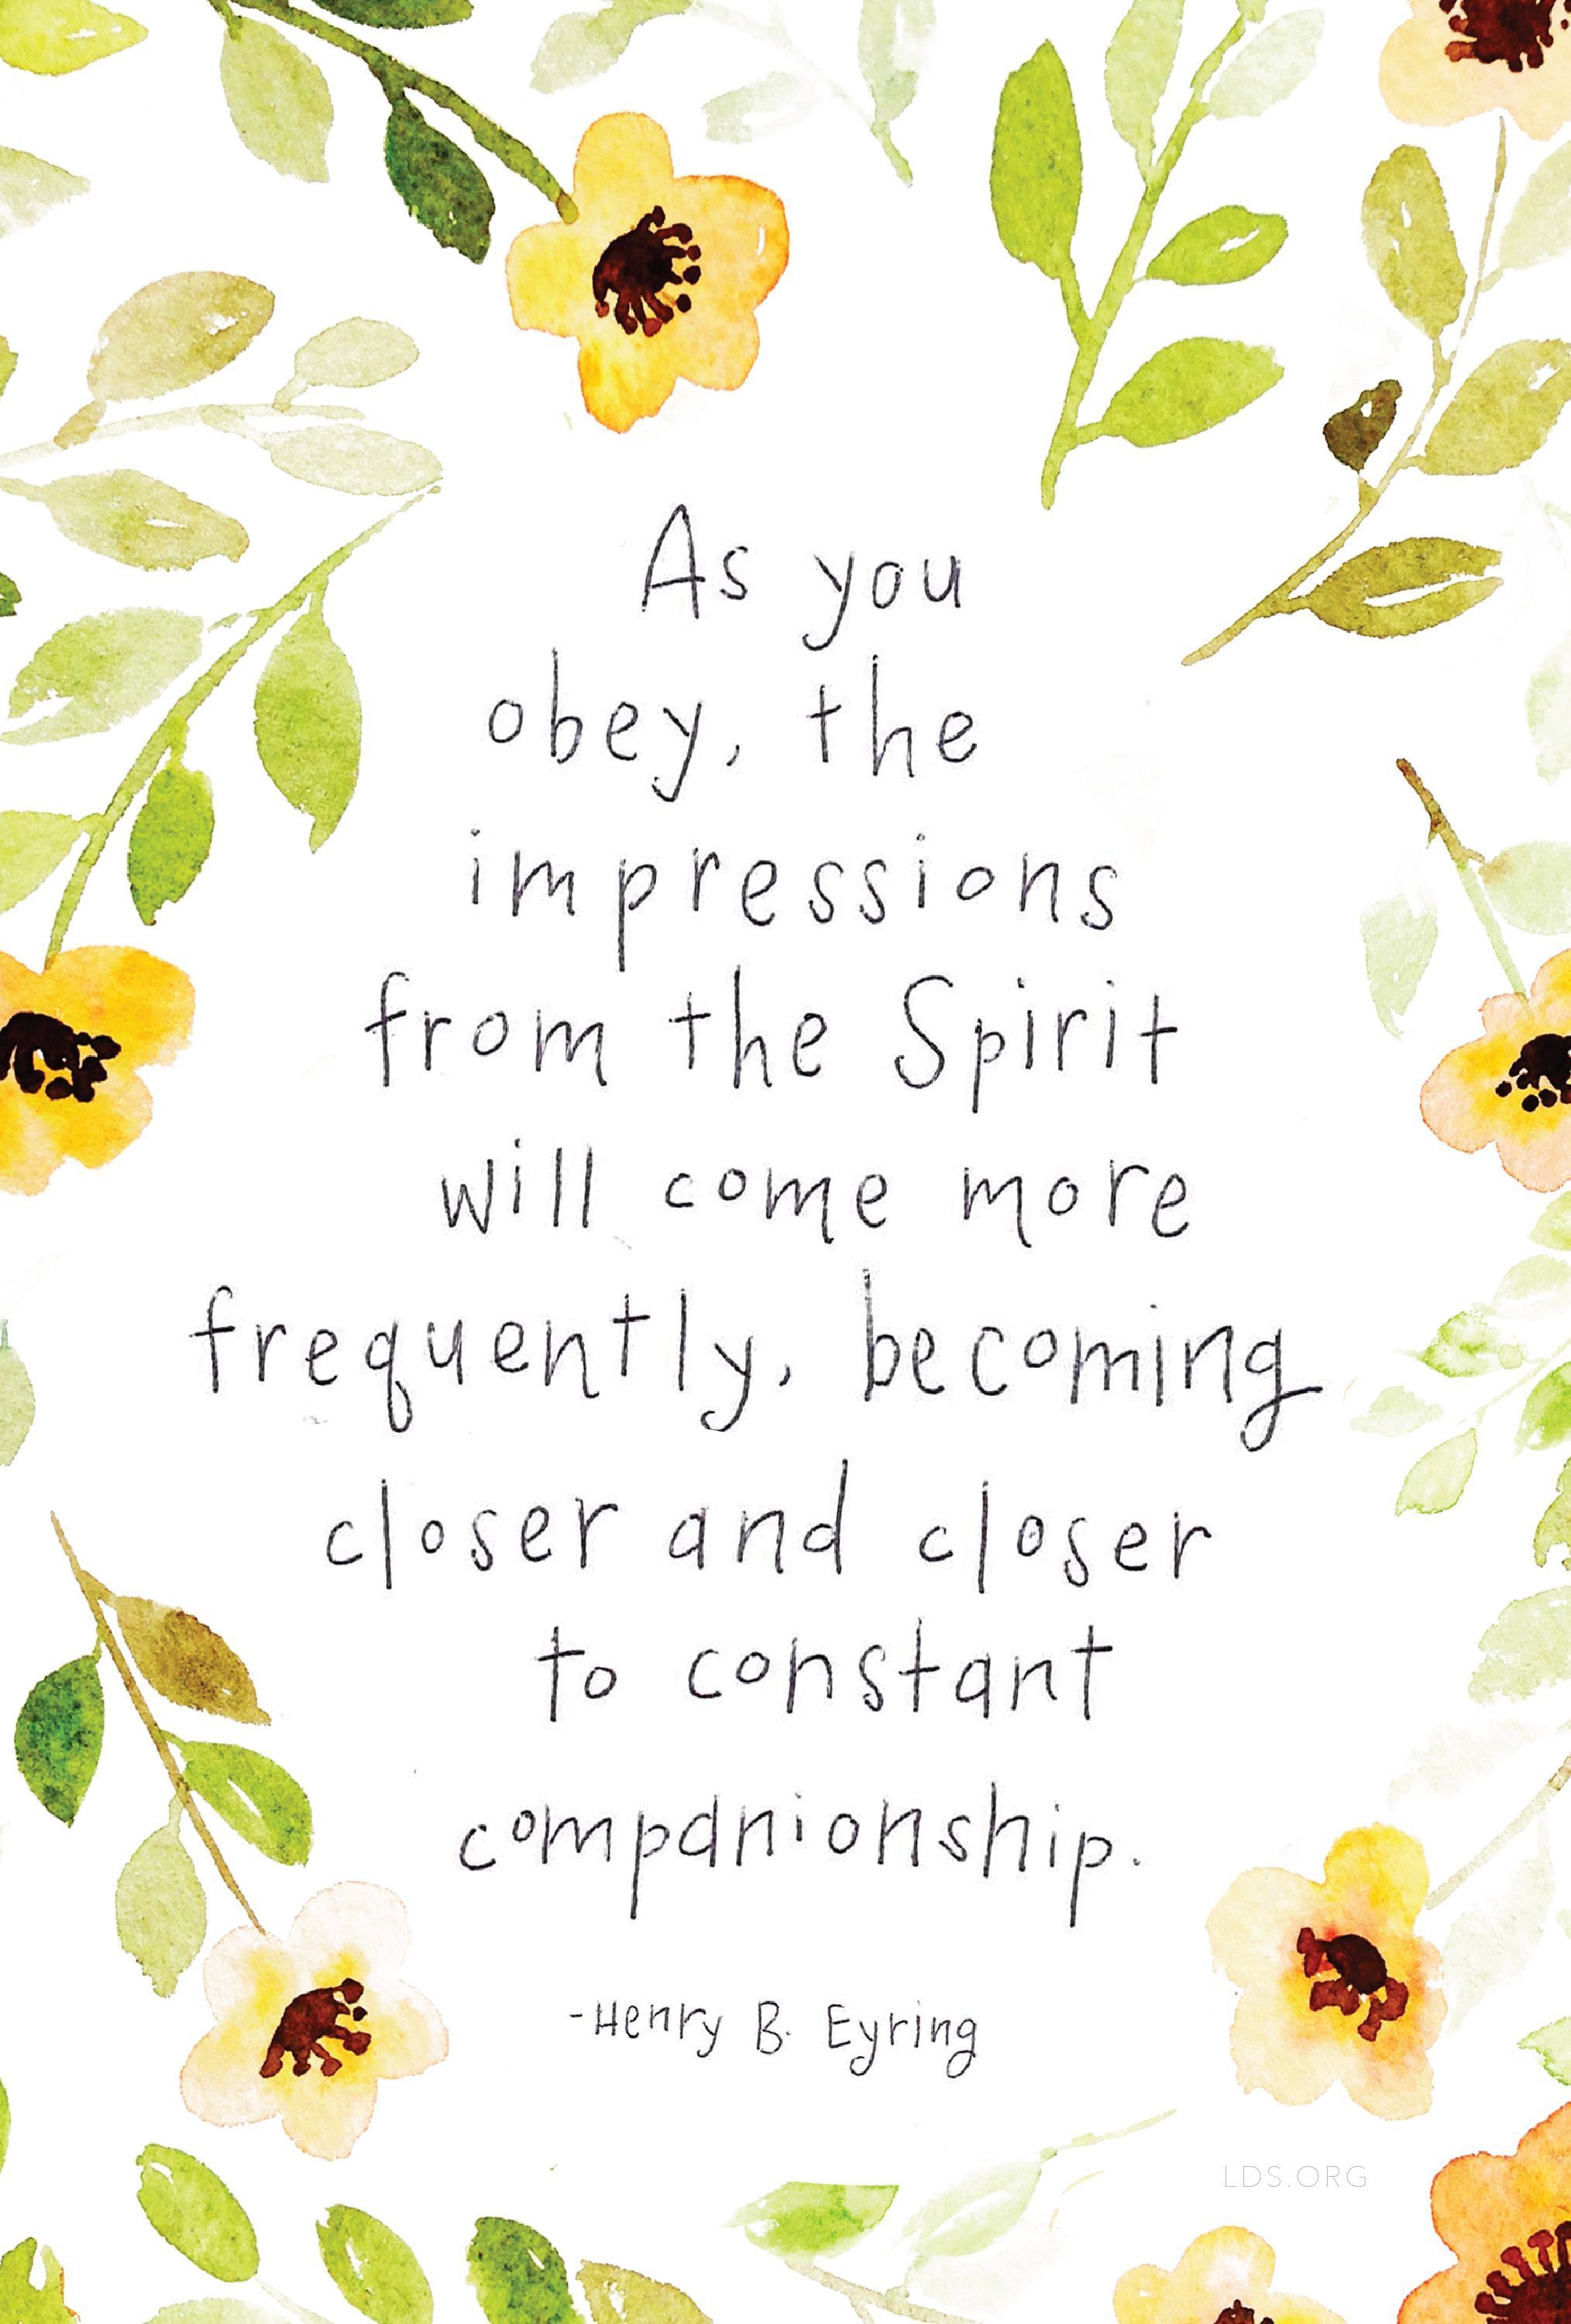 “As you obey, the impressions from the Spirit will come more frequently, becoming closer and closer to